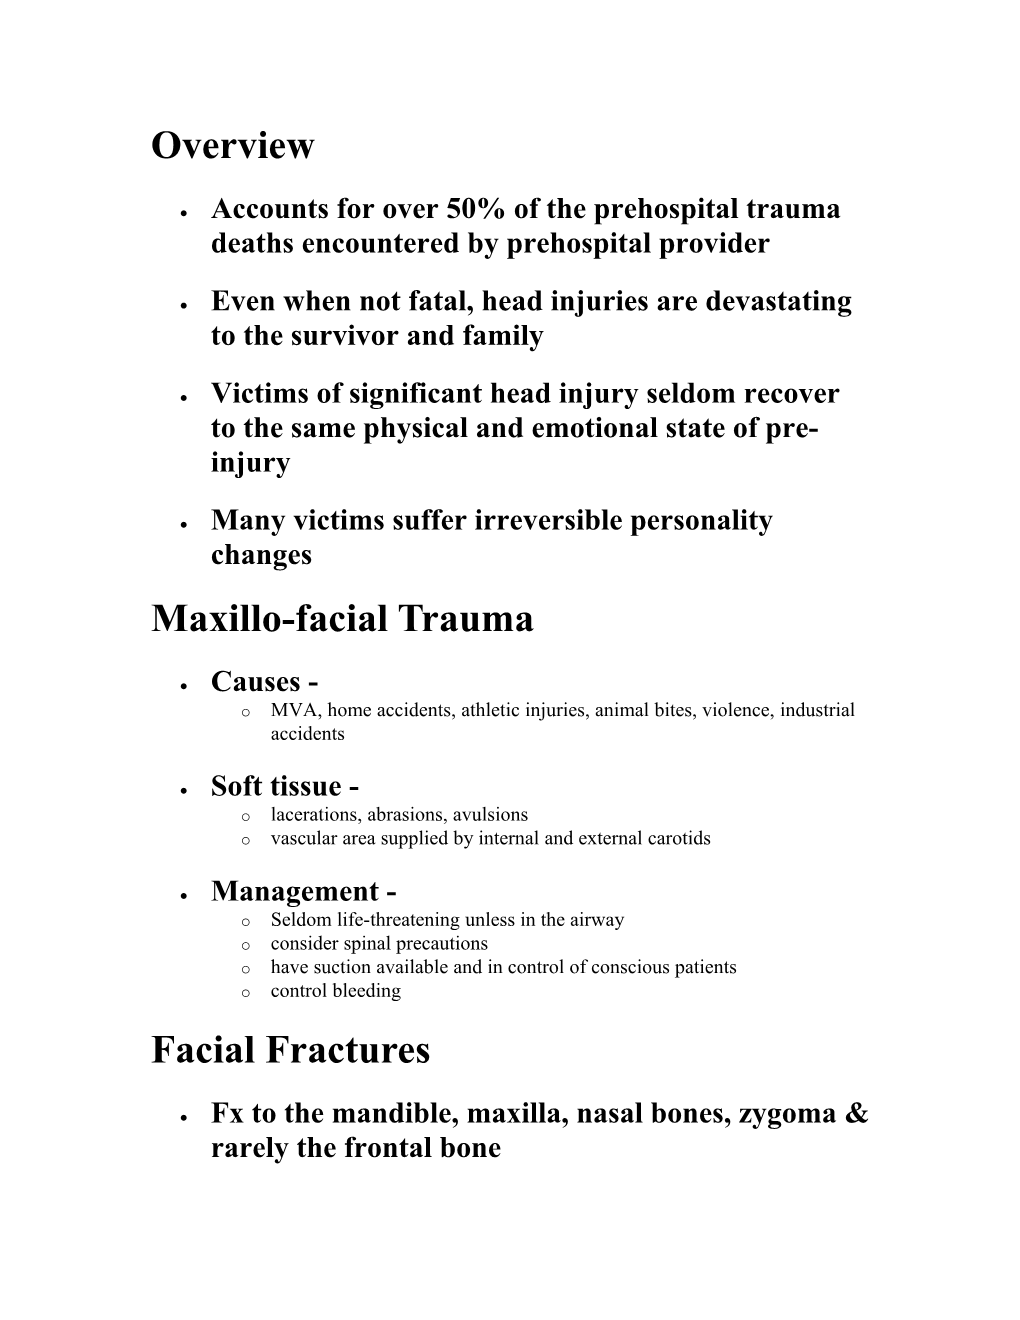 Accounts for Over 50% of the Prehospital Trauma Deaths Encountered by Prehospital Provider